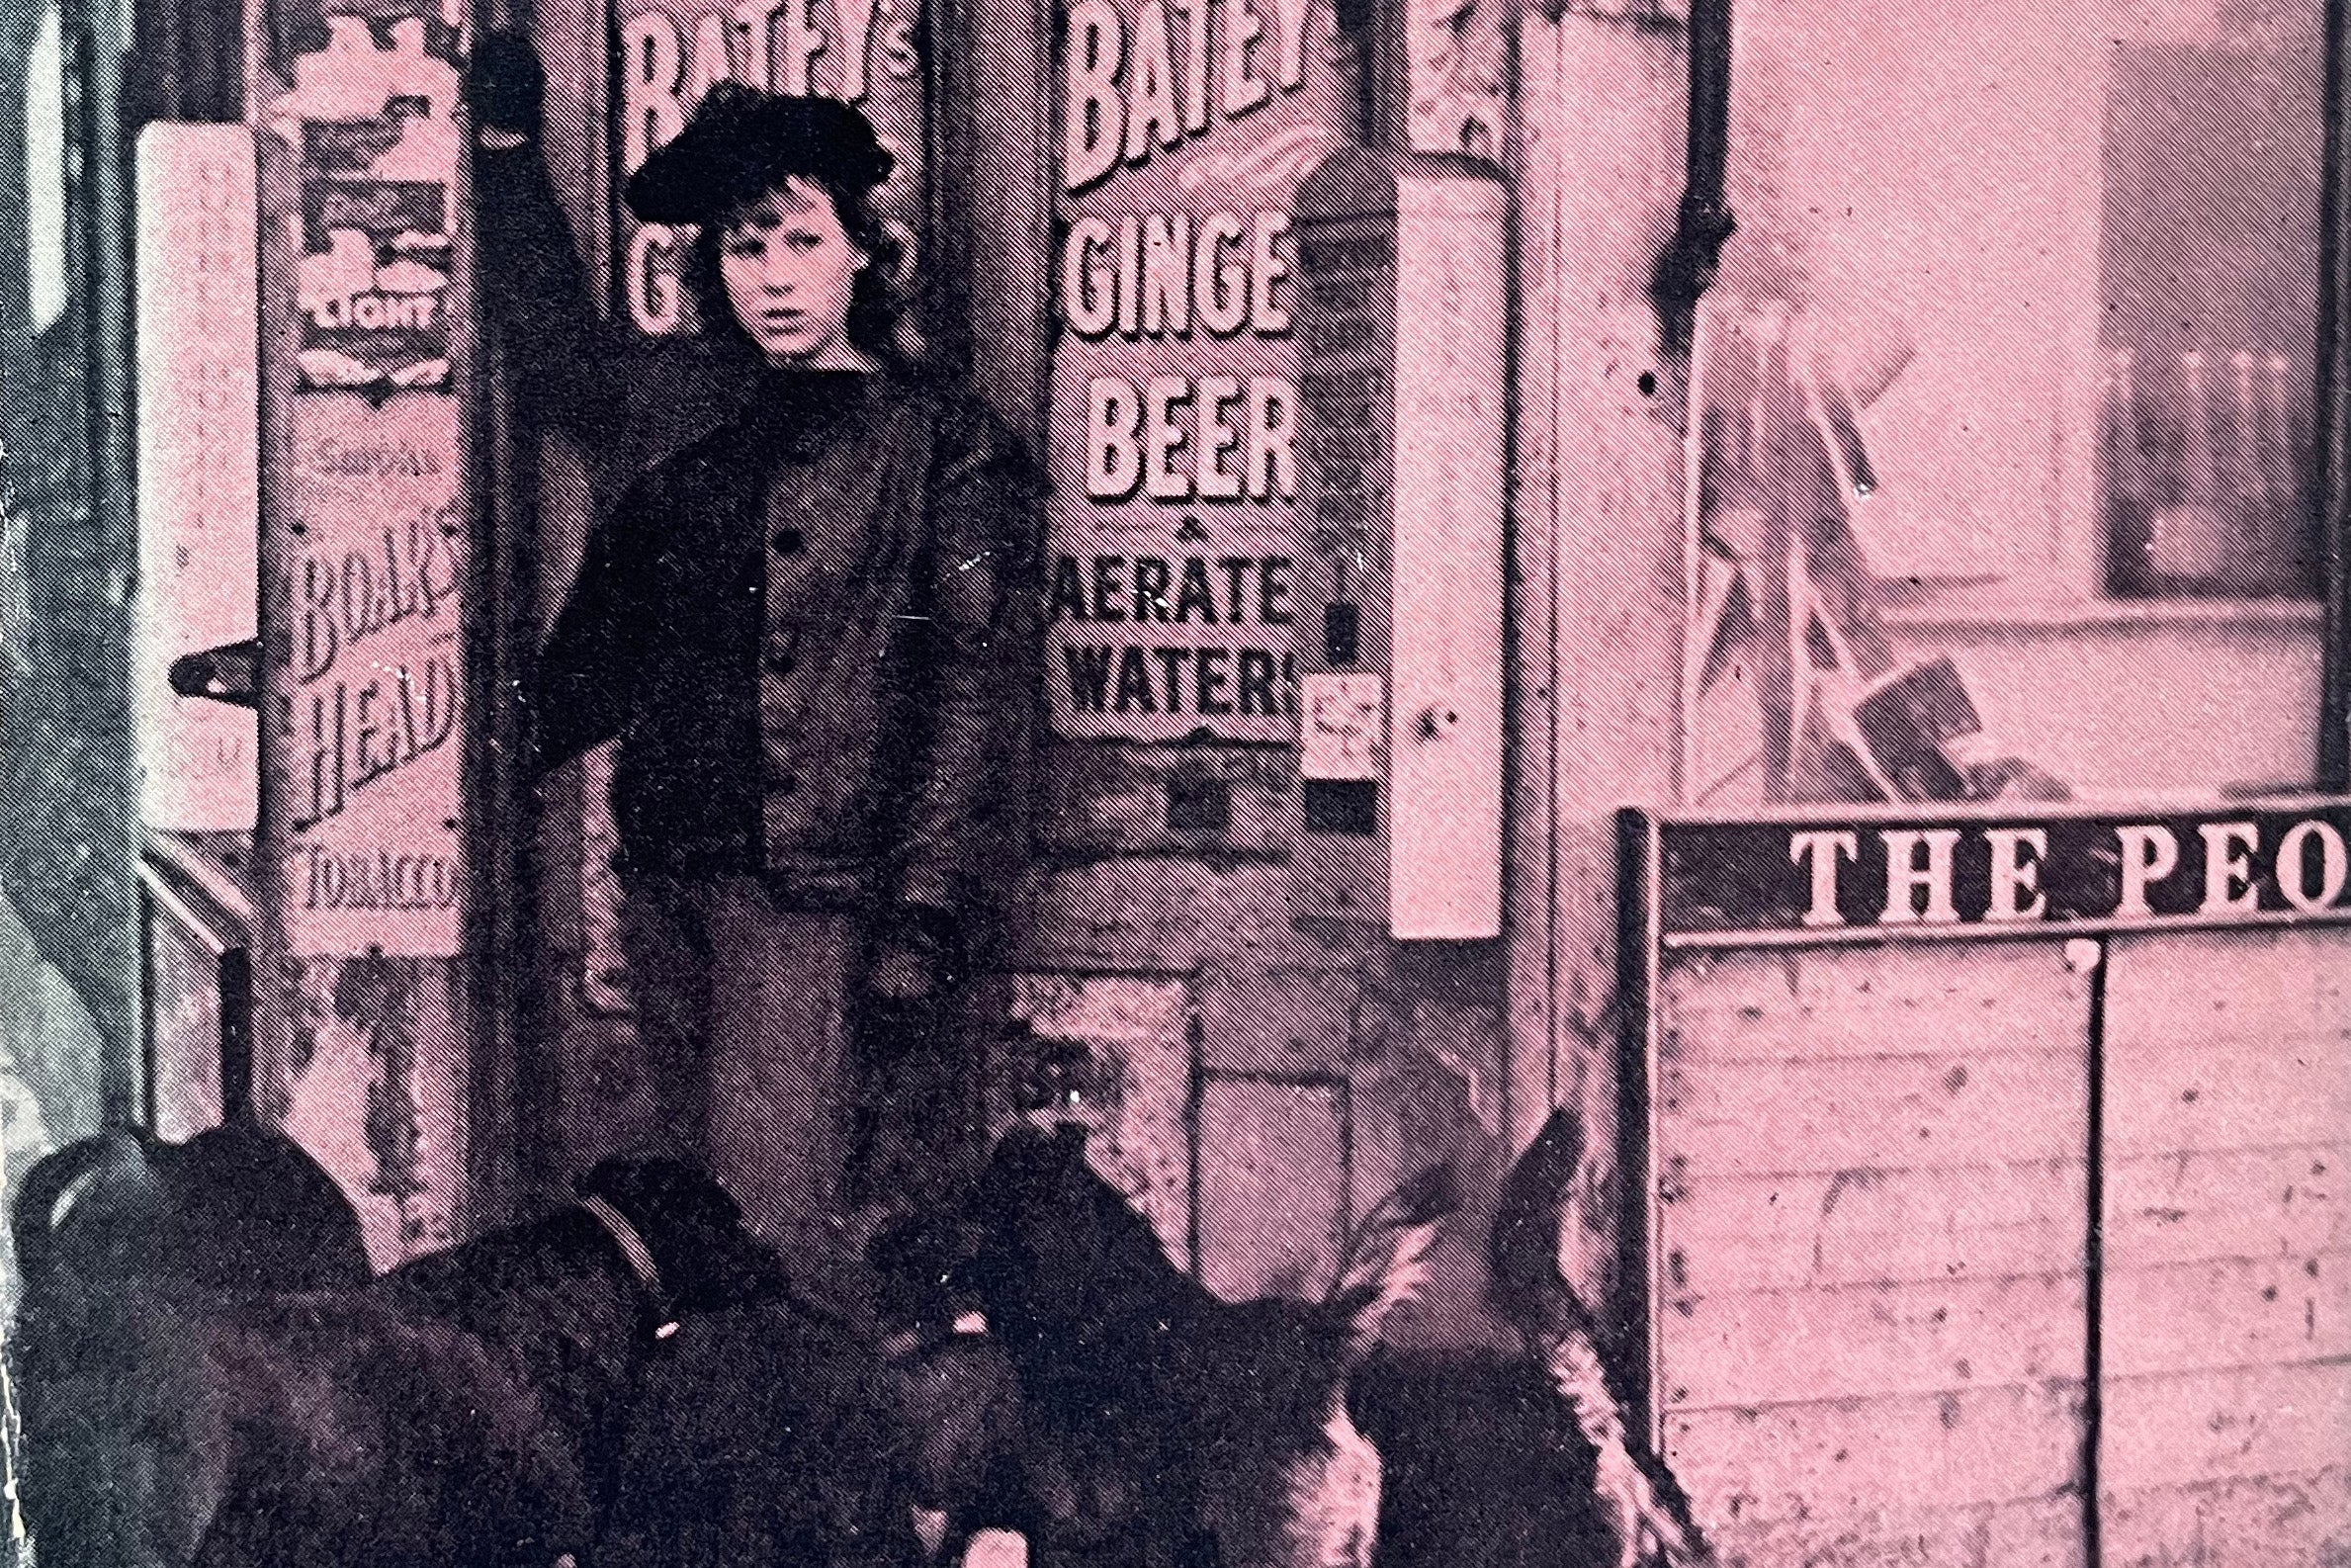 A photograph from the cover of the first edition of Up the Junction by Nell Dunn